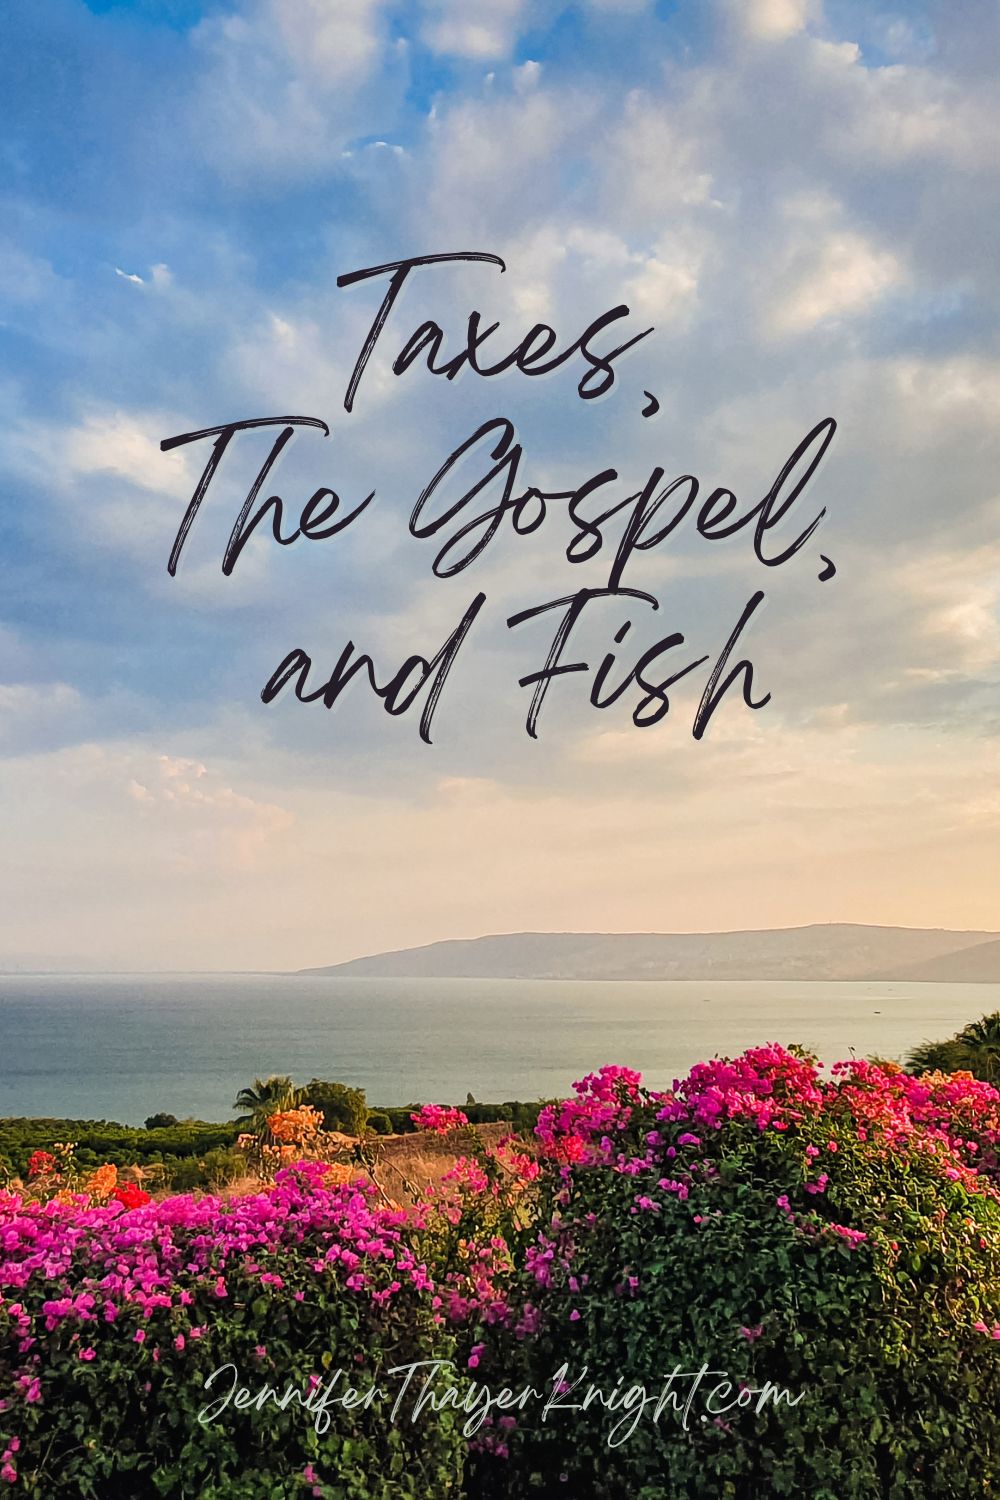 Taxes, The Gospel, and Fish